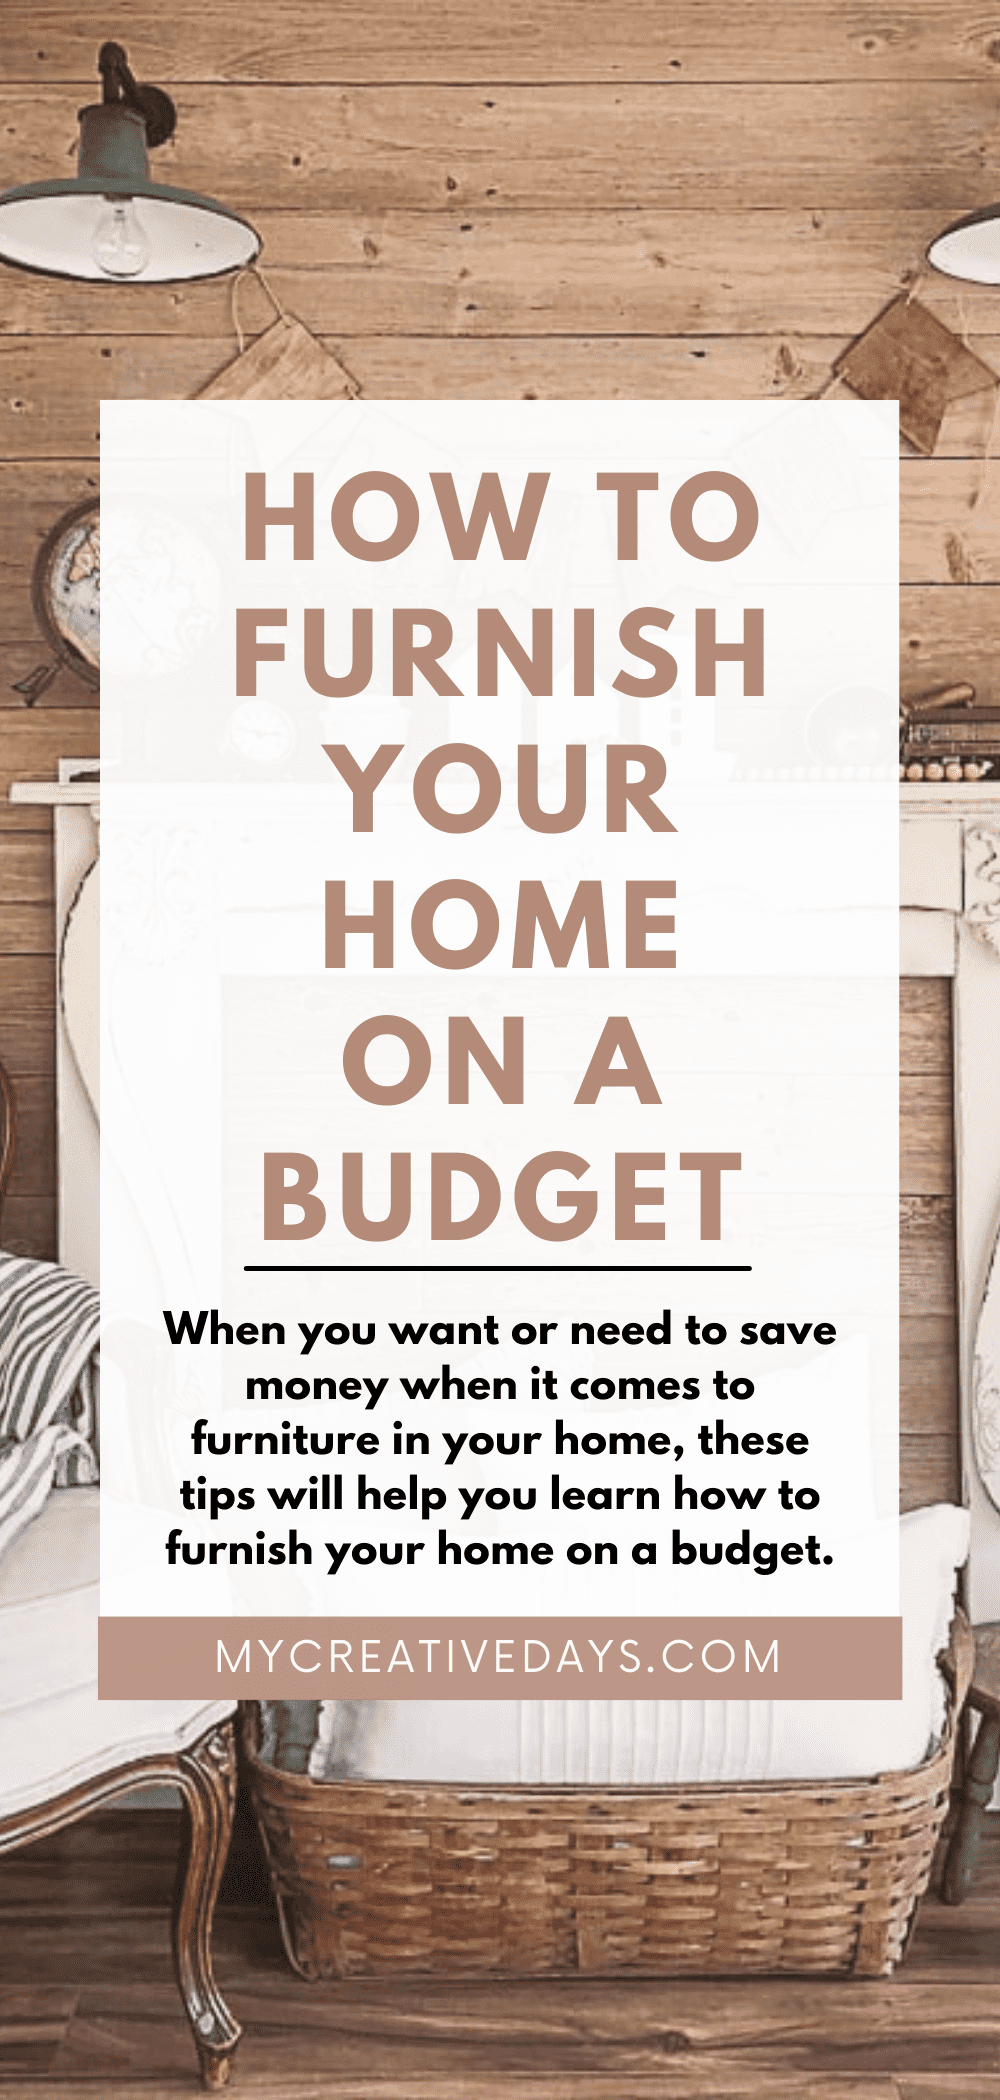 When you want or need to save money when furnishing your home, these tips will help you learn how to furnish your home on a budget.